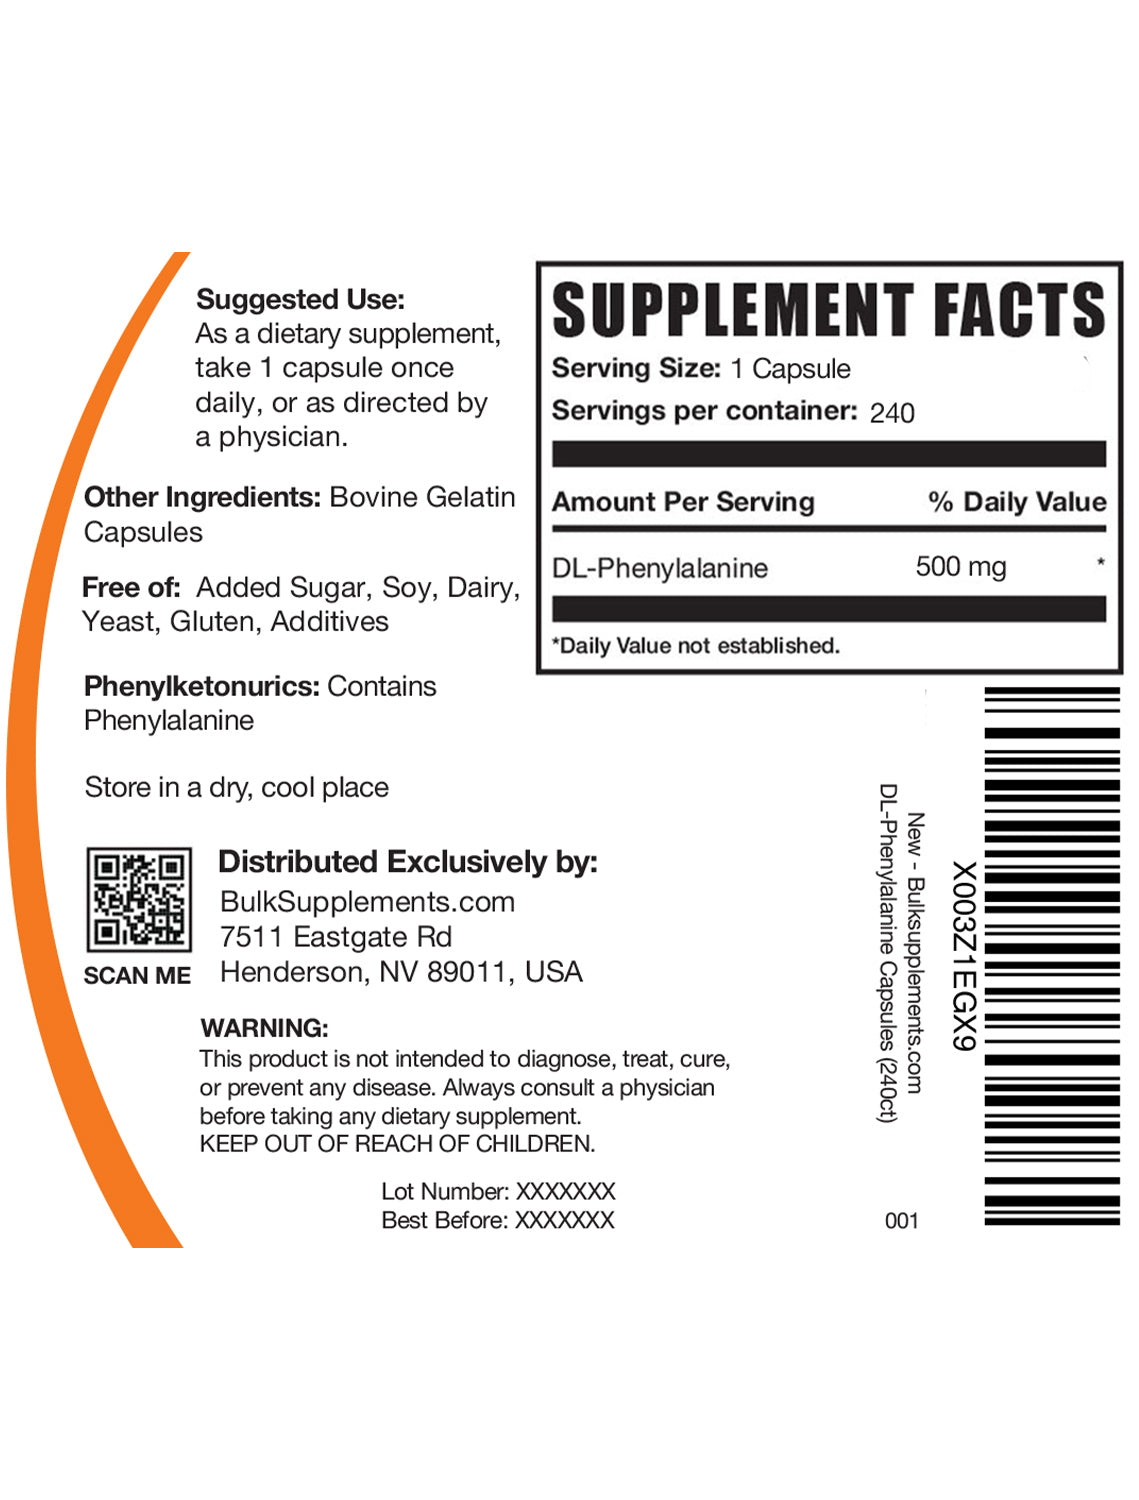 Supplement Facts DL-Phenylalanine